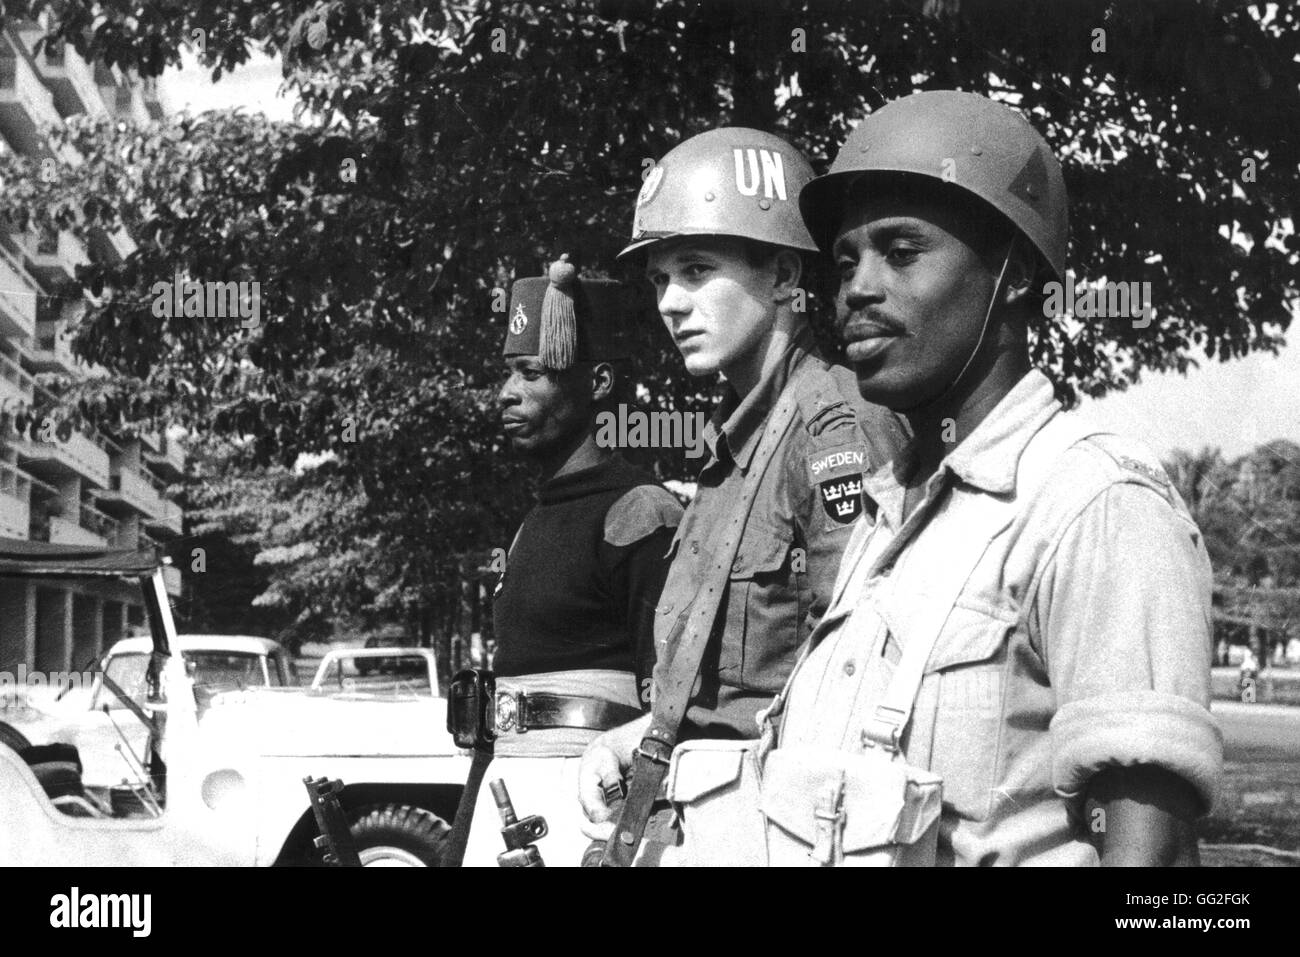 U.N.O. soldiers from different contigents, on duty in Leopoldville 1960 Congo (Zaire) Stock Photo